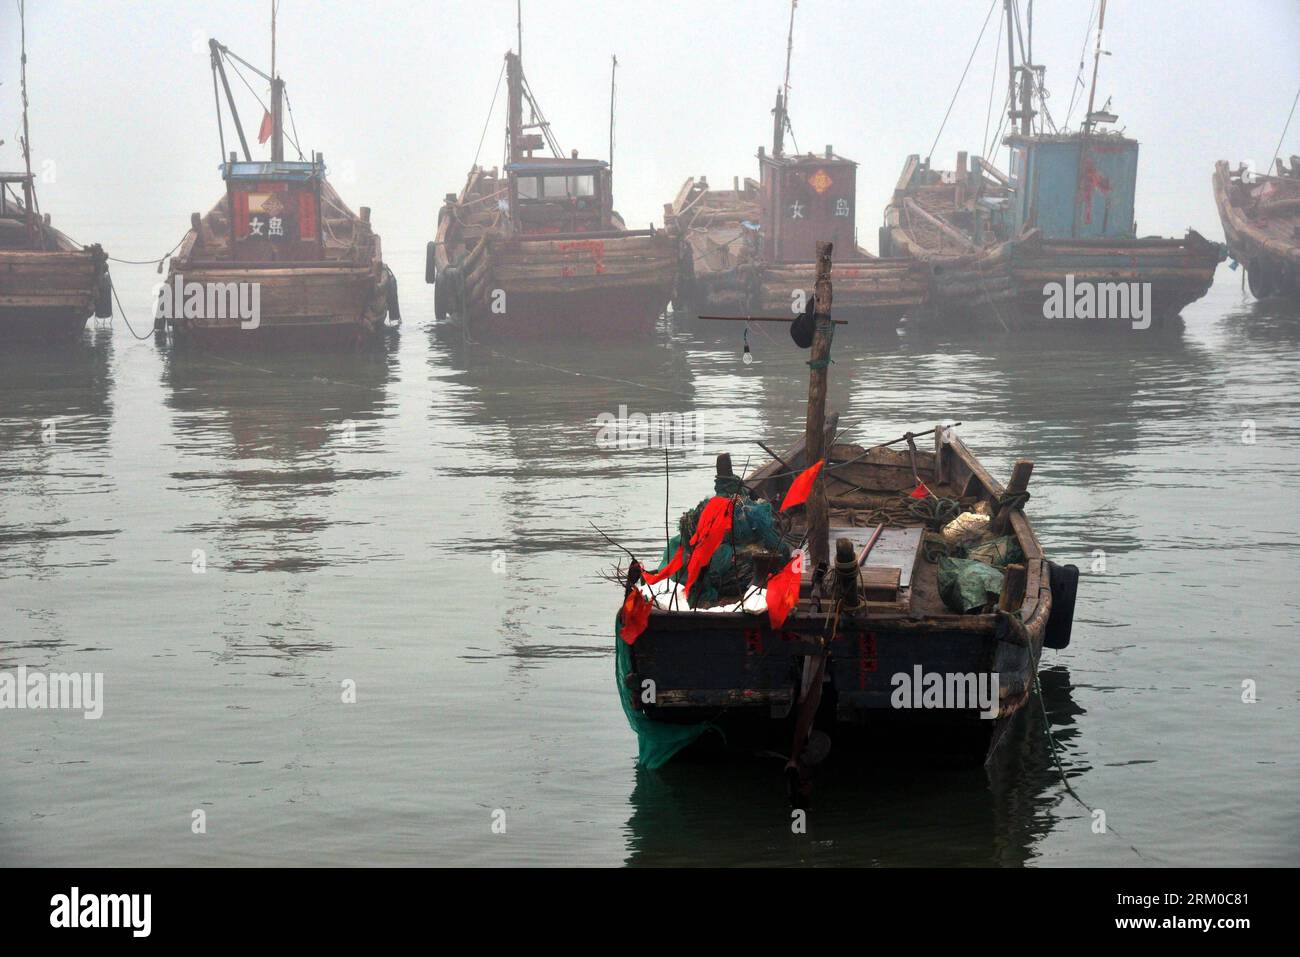 Bildnummer: 59365222  Datum: 17.03.2013  Copyright: imago/Xinhua (130317) -- QINGDAO, March 17, 2013 (Xinhua) -- Fishing boats are berthed in a port during the 2013 Tianheng Sea Ritual in Jimo of Qingdao, east China s Shandong Province, March 17, 2013. The Tianheng Sea Ritual has been observed by fishermen in Tianheng Town of Jimo for over five centuries. The ritual takes place annually around Guyu, the sixth of the 24 solar terms, when fishermen prepare for the new fishing season. During the event, local fishermen would present offerings to the sea and pray for a prolific turnout in the upcom Stock Photo